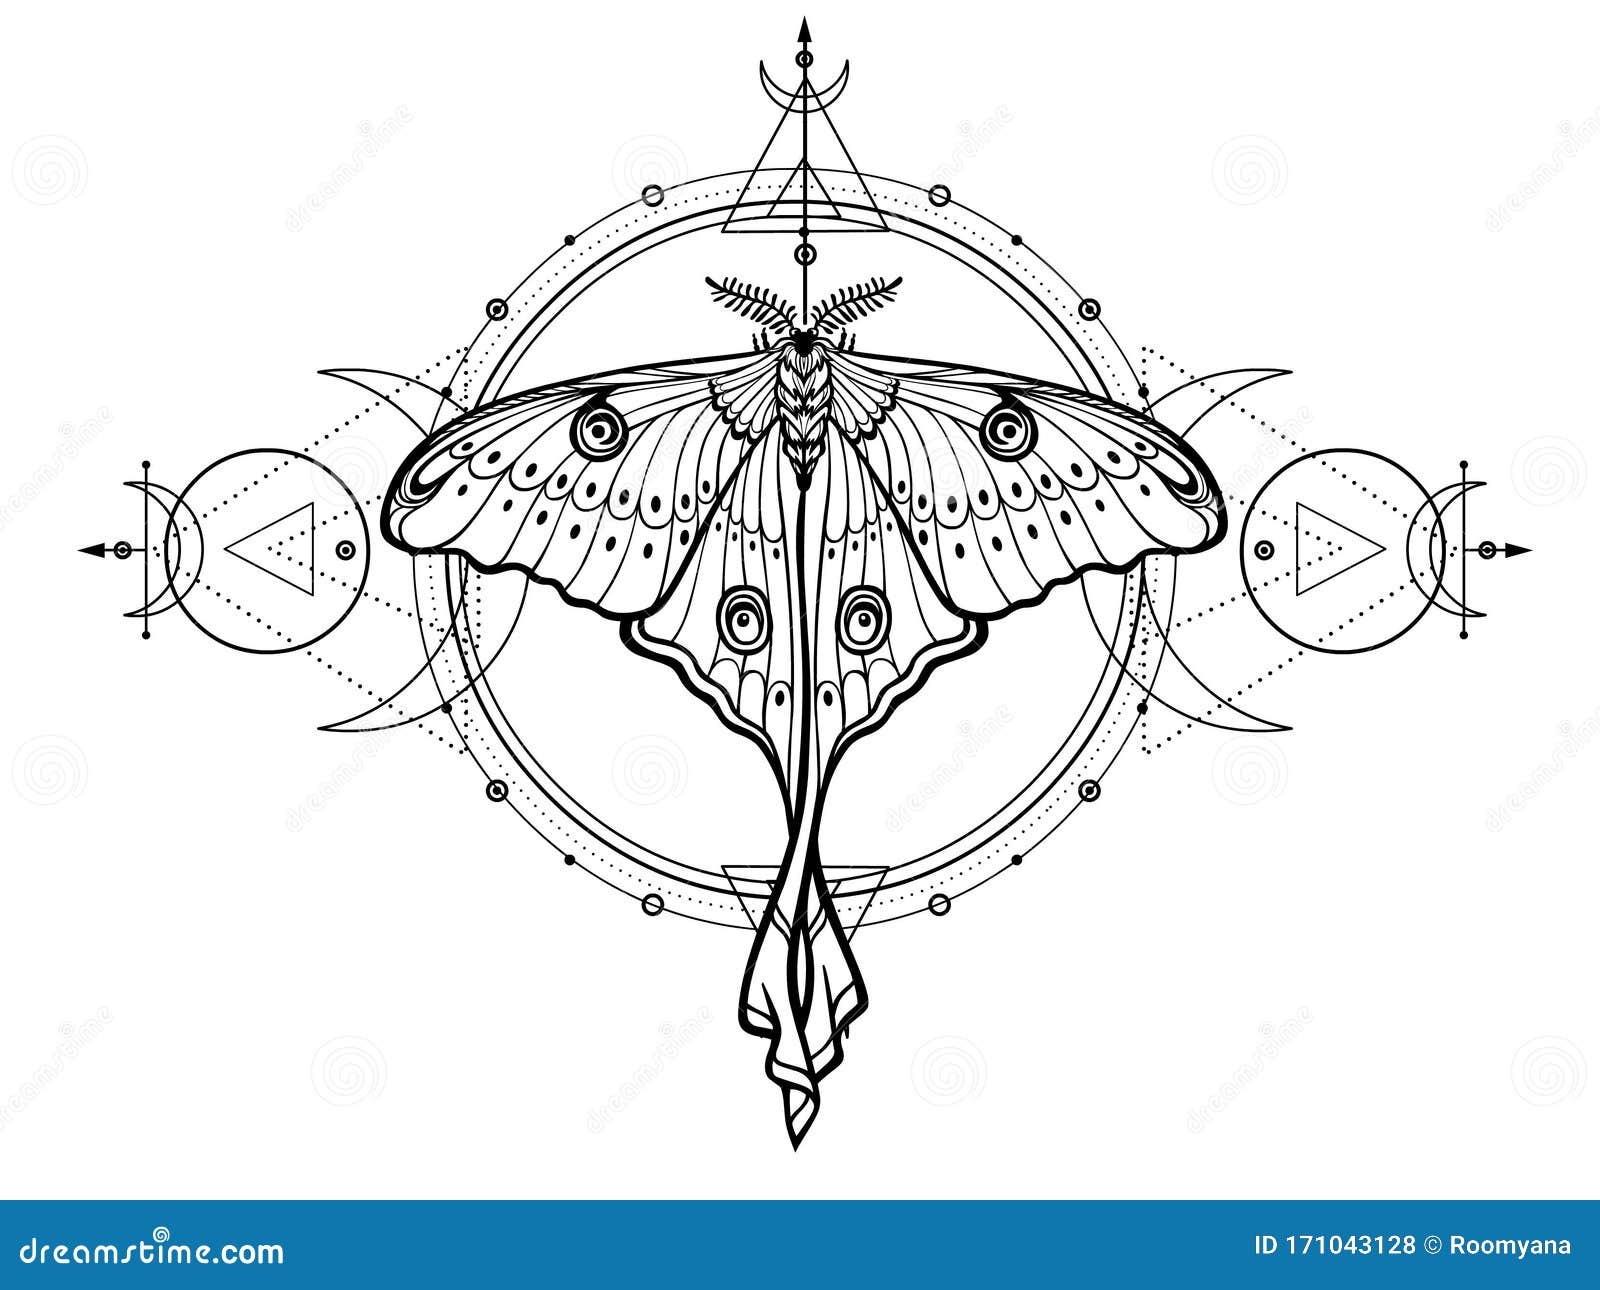 Moth Tattoo White Transparent Moth Tattoo With Mysterious Style Head Moth  Death PNG Image For Free Download